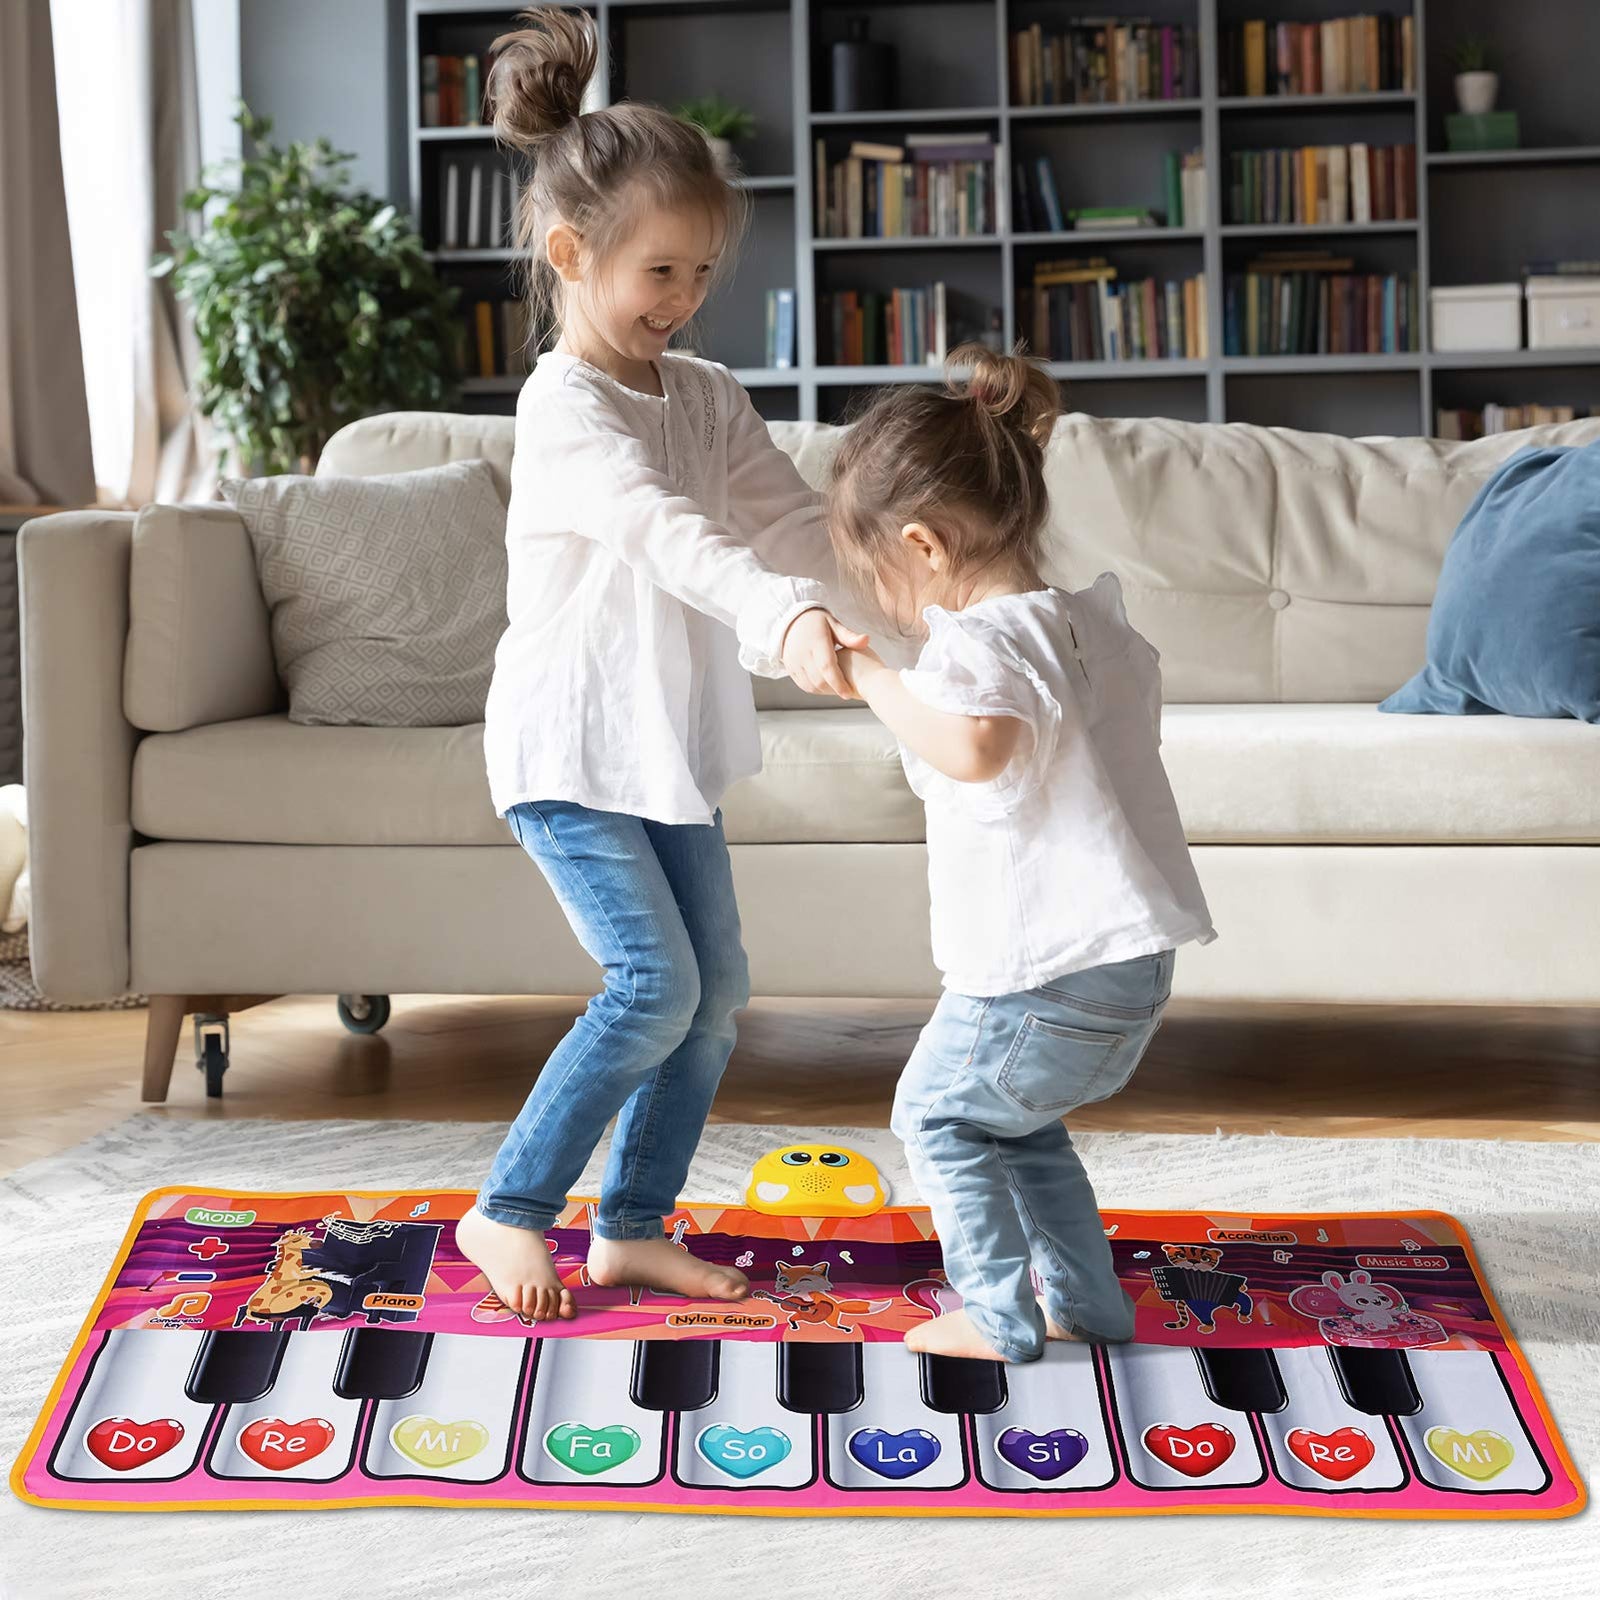 Kids Musical Piano Mats,47.24x15.75 inch Soft Baby Early Education Portable Dance Music Piano Keyboard Carpet Musical Touch Play Game Toy Gifts for 1 2 3 4 5 Year Kids Toddlers Girls Boys